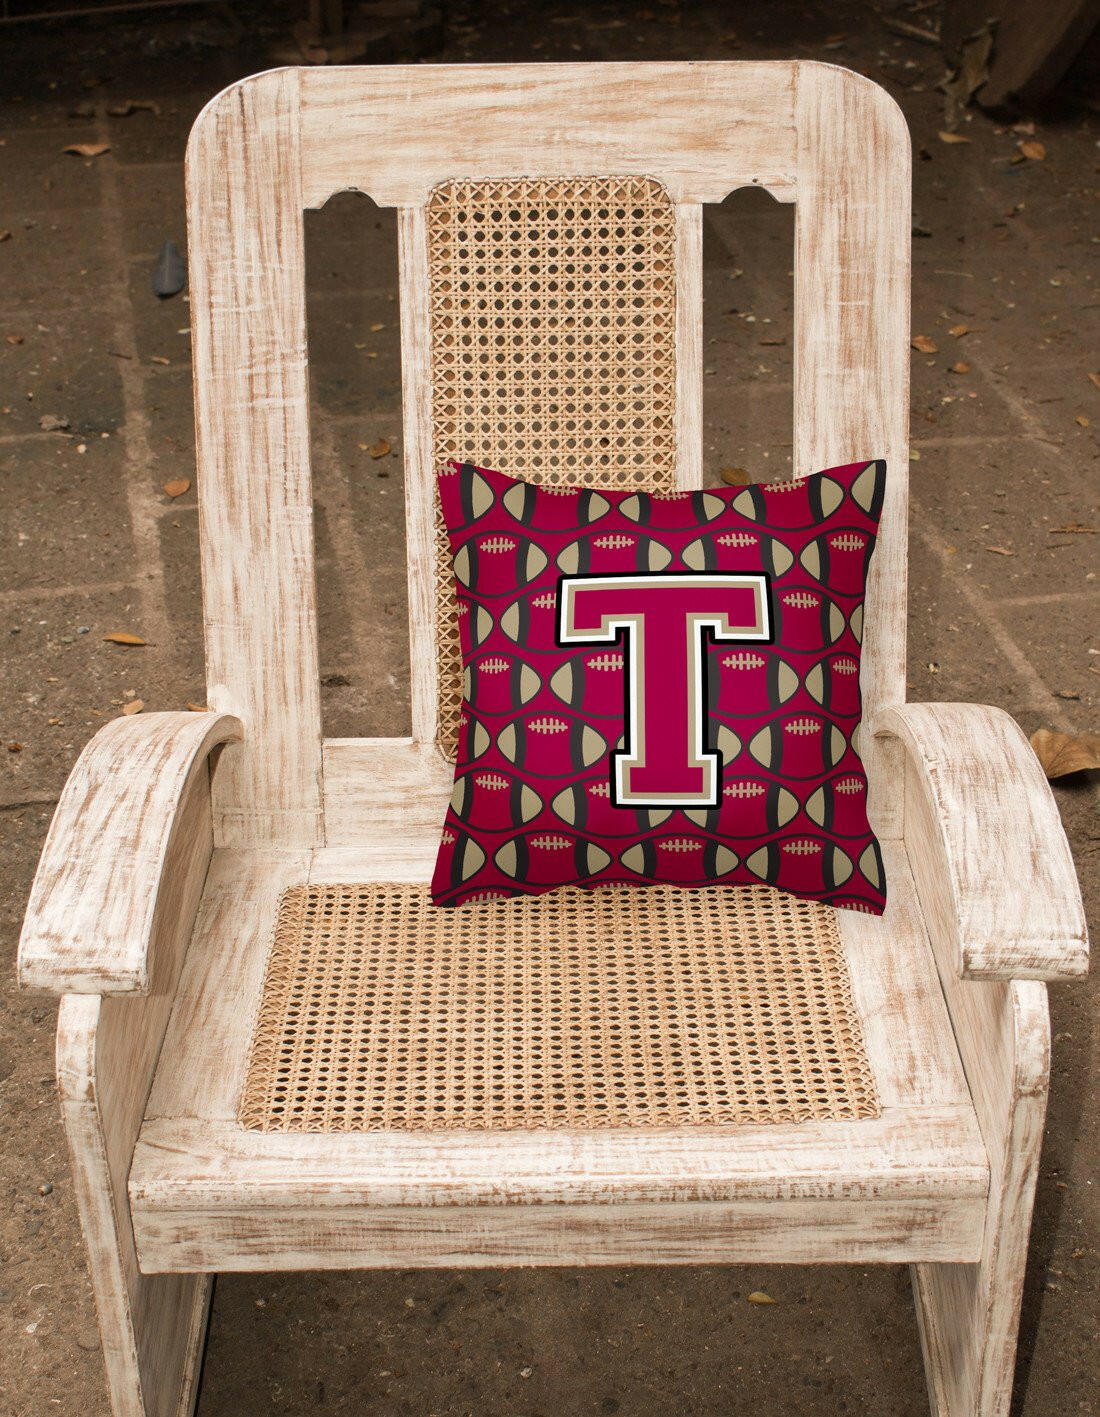 Letter T Football Garnet and Gold Fabric Decorative Pillow CJ1078-TPW1414 by Caroline's Treasures